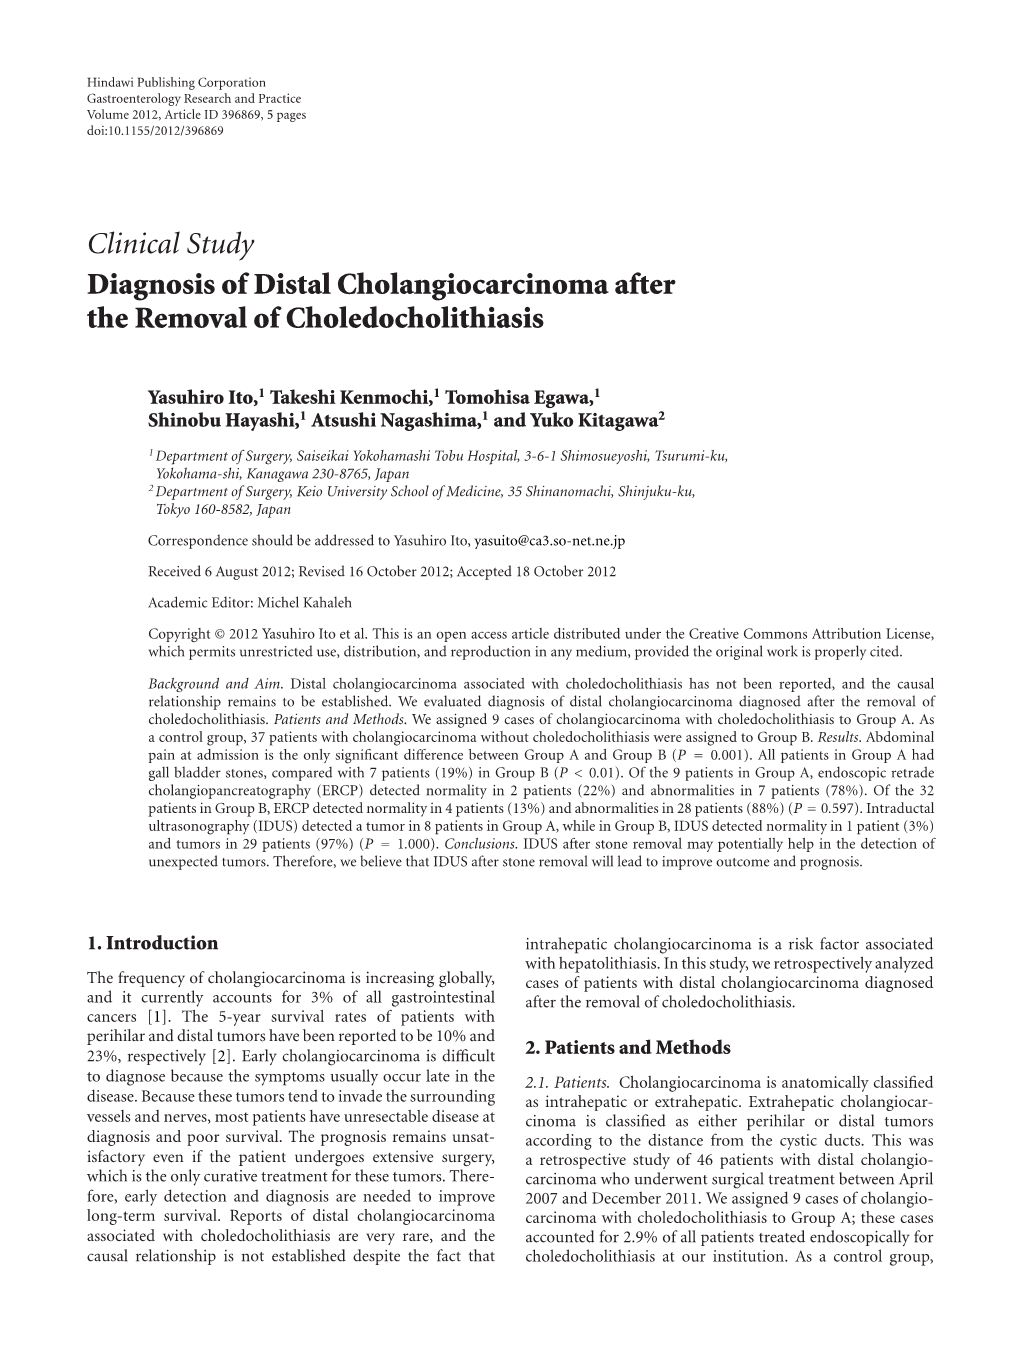 Diagnosis of Distal Cholangiocarcinoma After the Removal of Choledocholithiasis